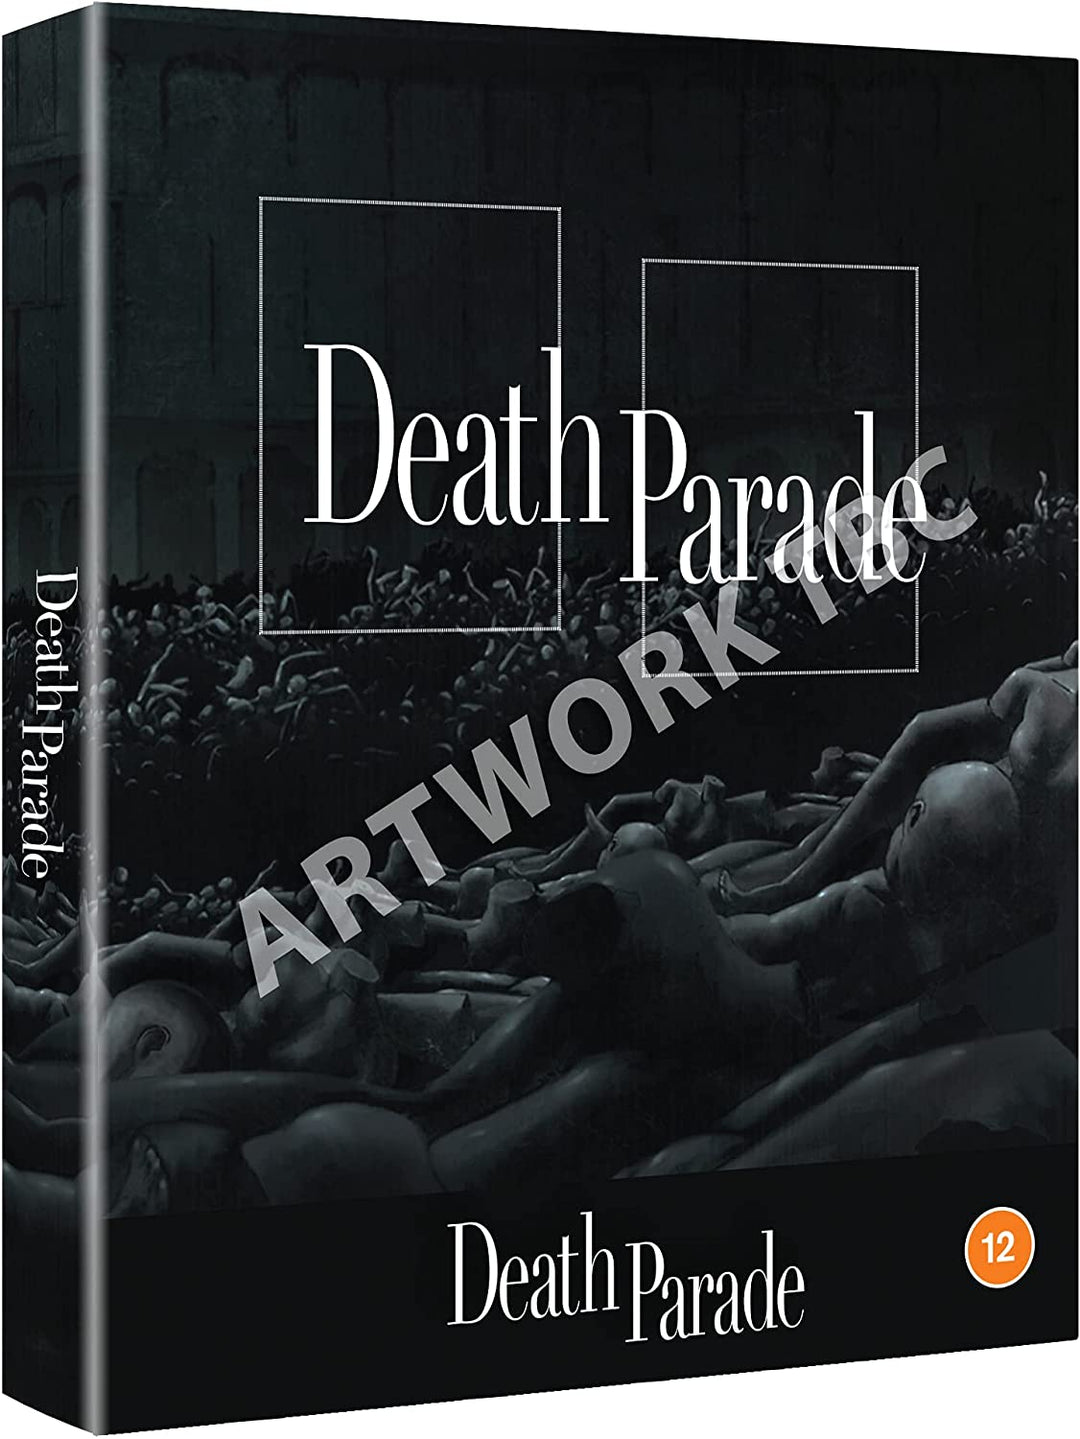 Death Parade - The Complete Series - Limited Edition + Digital Copy - thriller [Blu-ray]